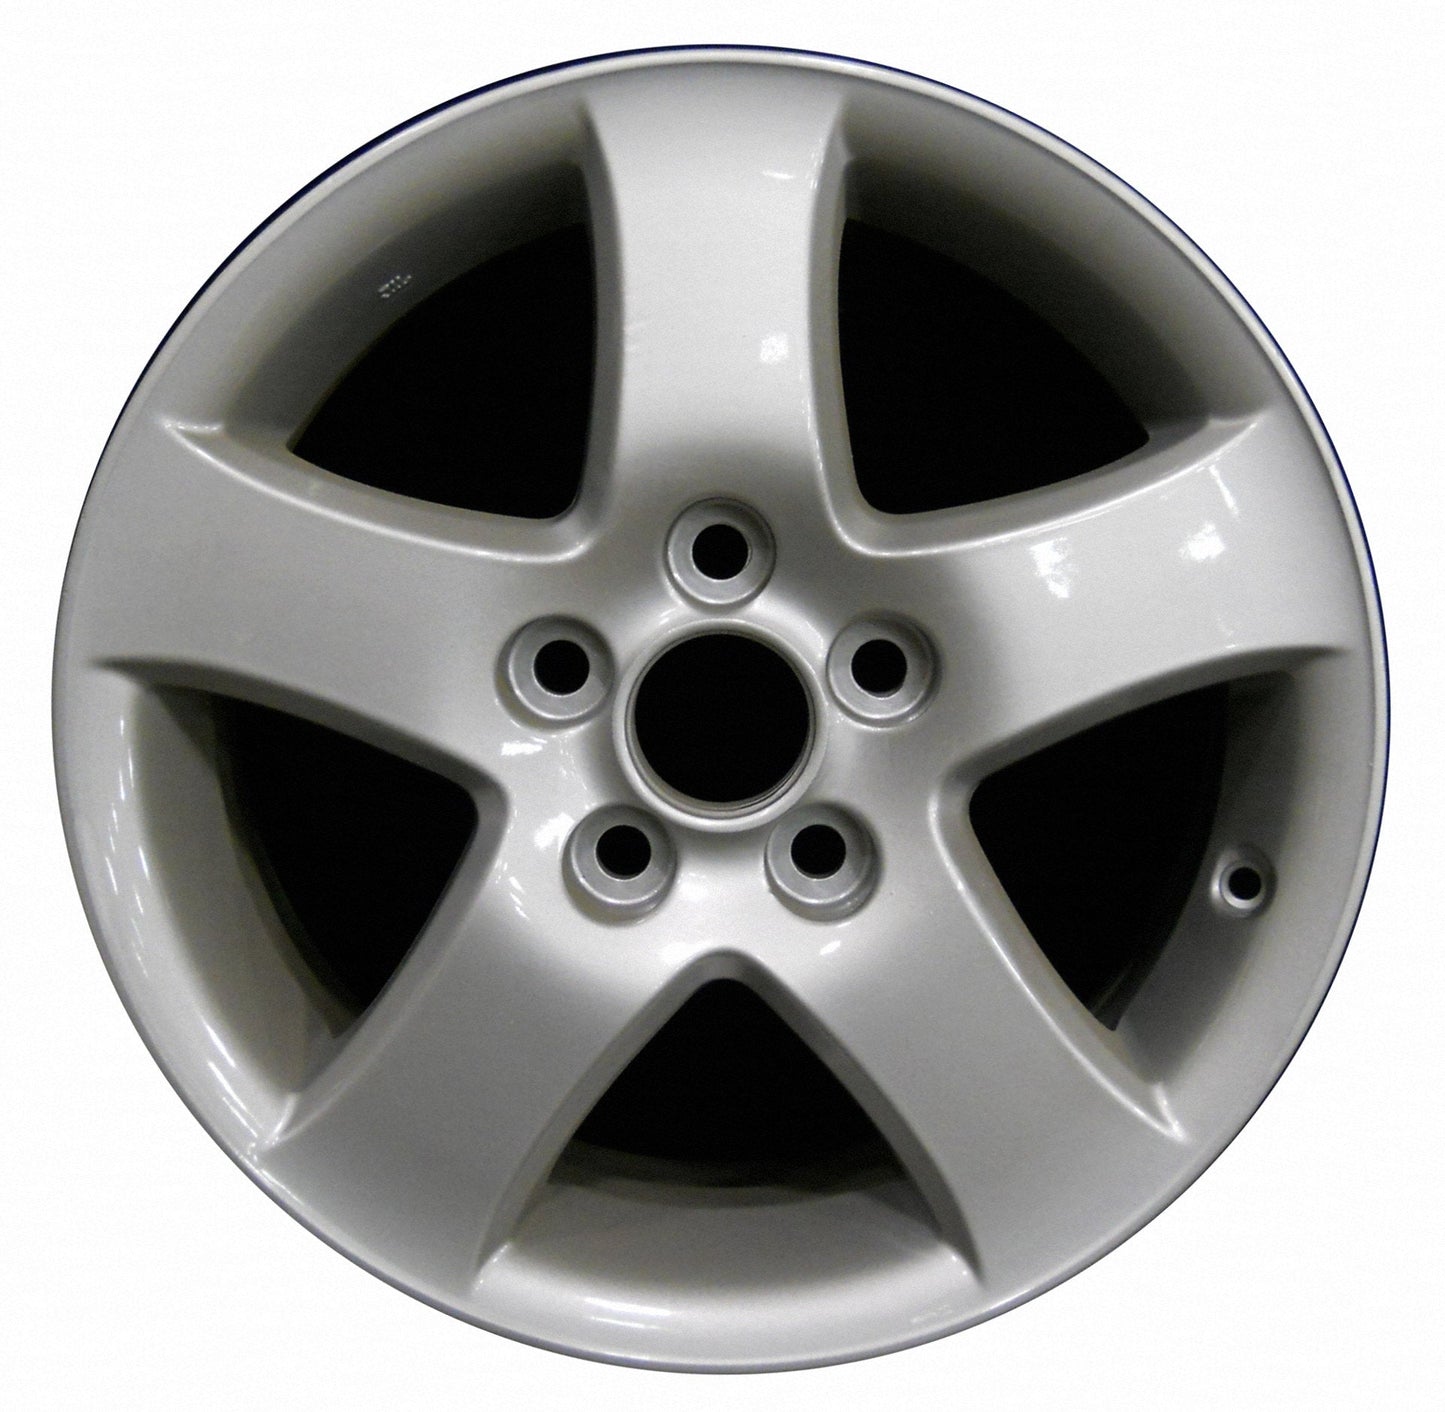 Toyota Camry  2002, 2003, 2004, 2005, 2006 Factory OEM Car Wheel Size 16x6.5 Alloy WAO.69416.PS07.FF